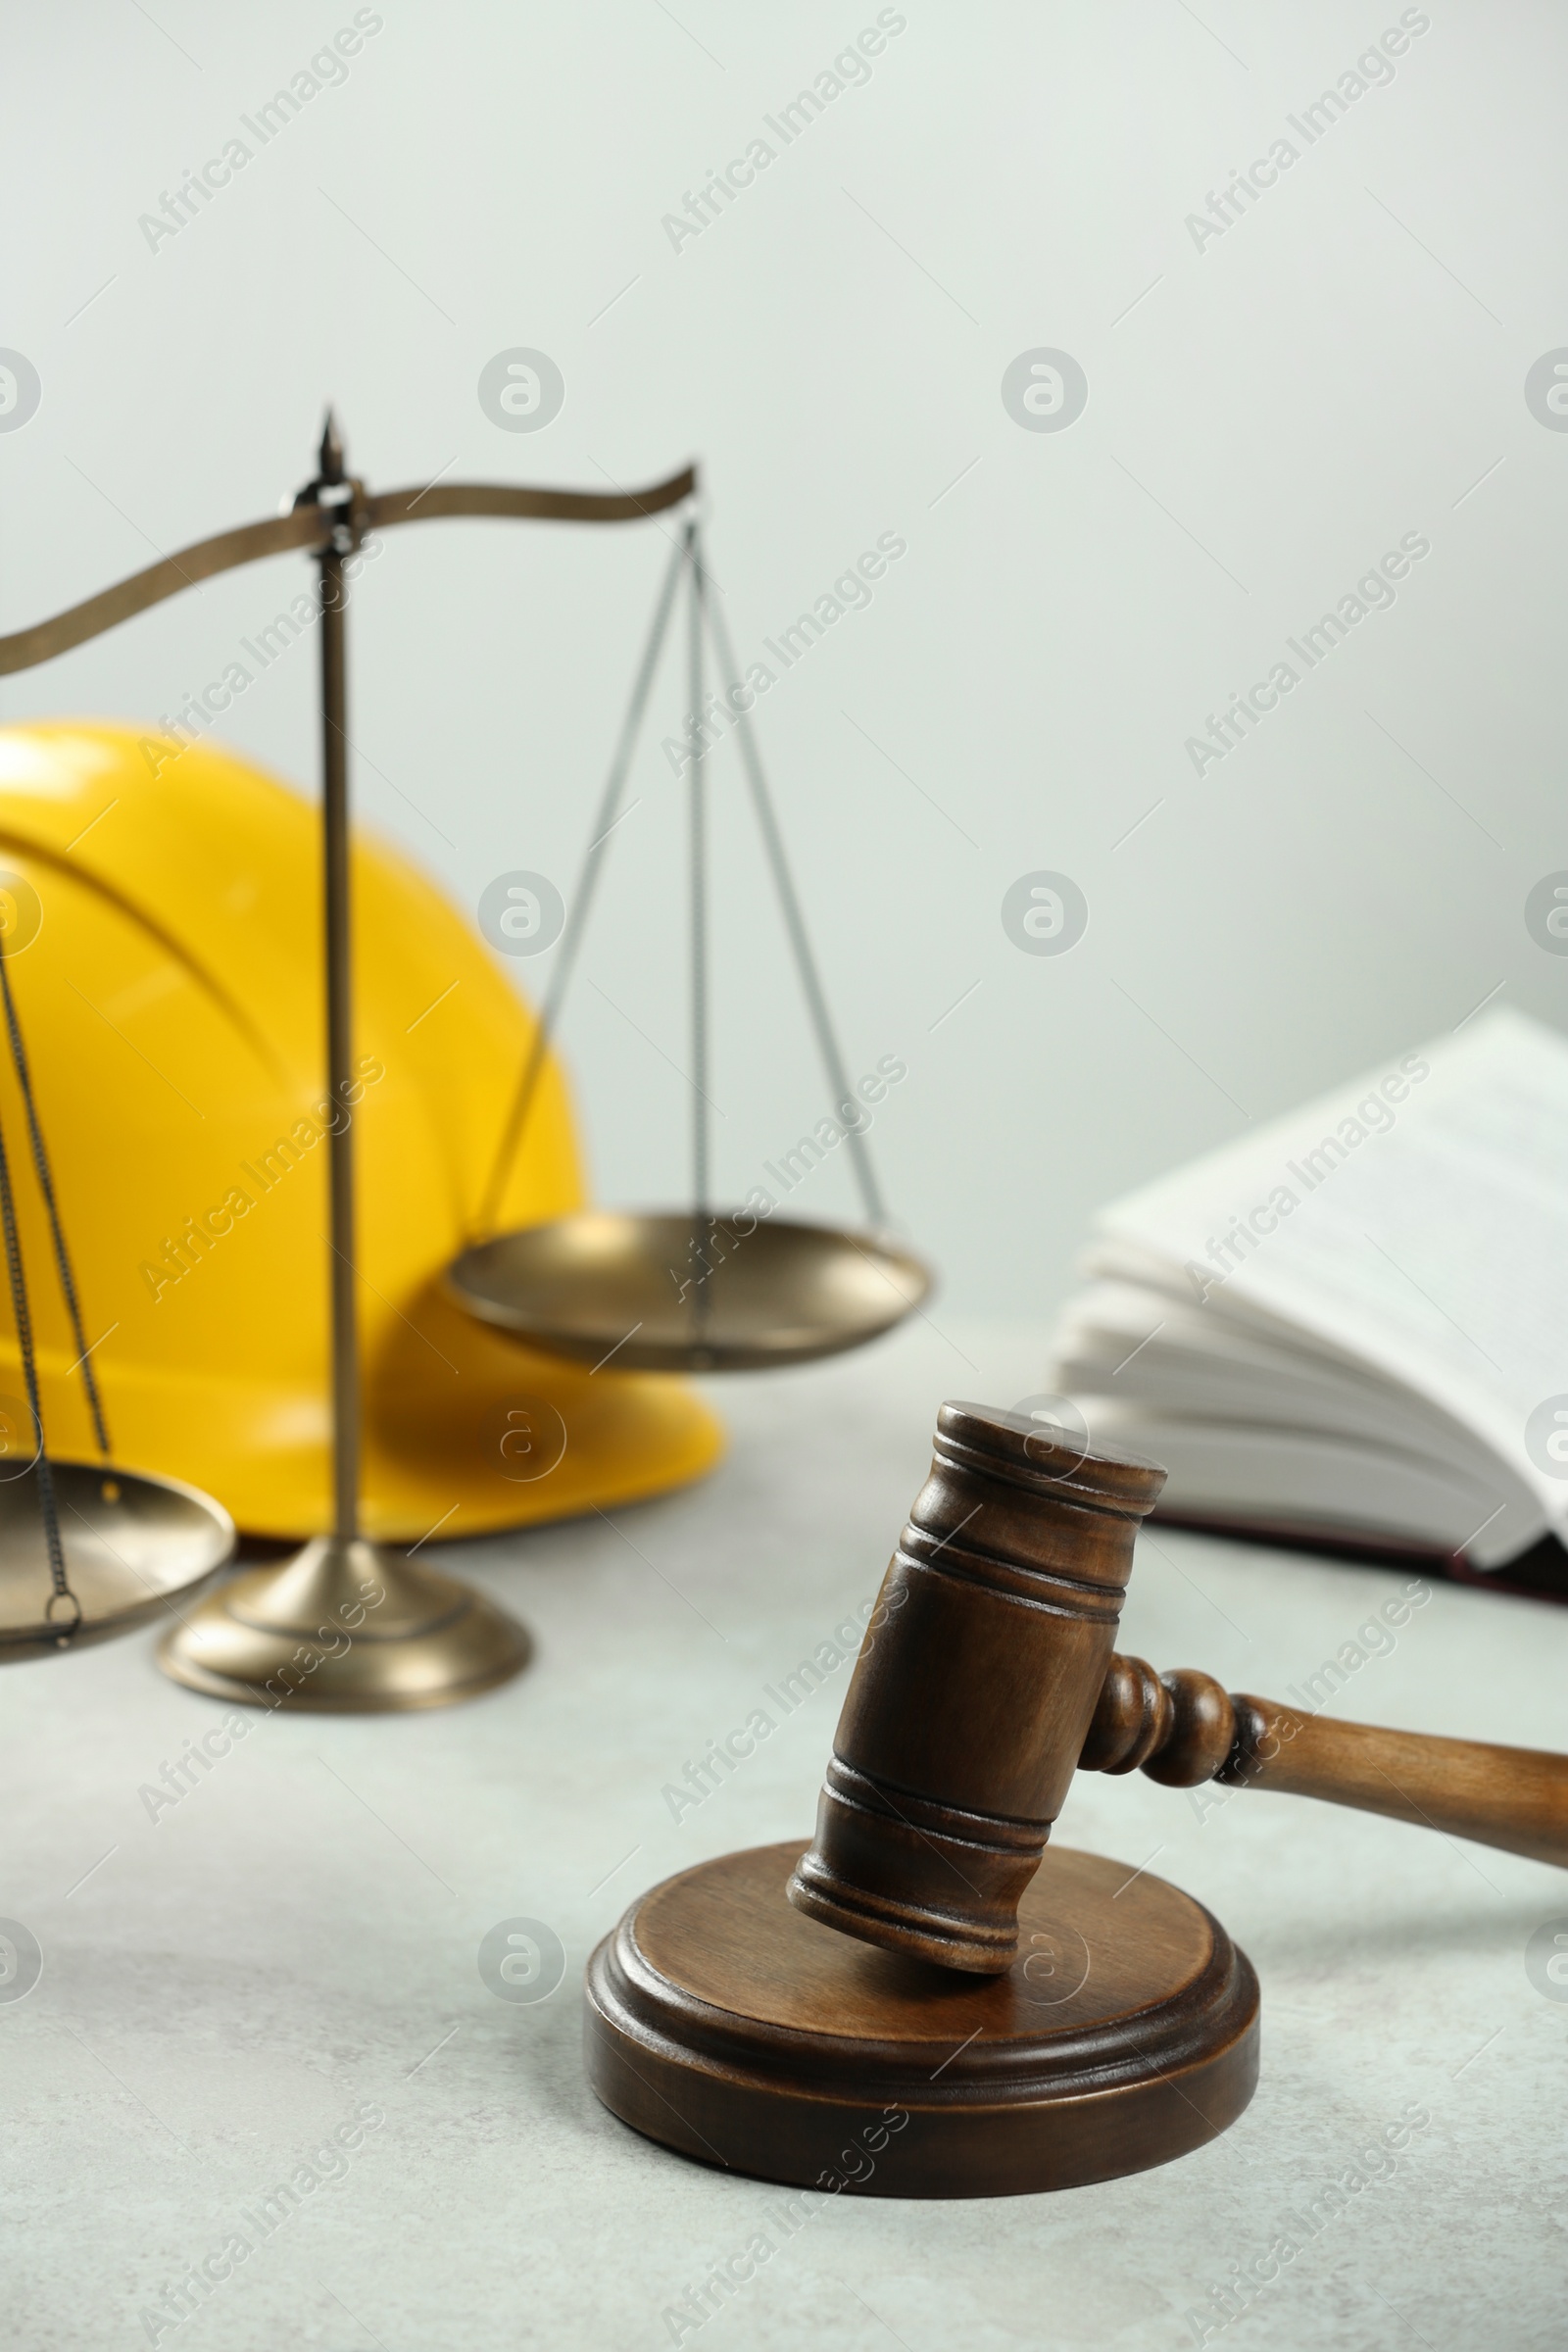 Photo of Construction and land law concepts. Gavel, scales of justice and hard hat on white table indoors